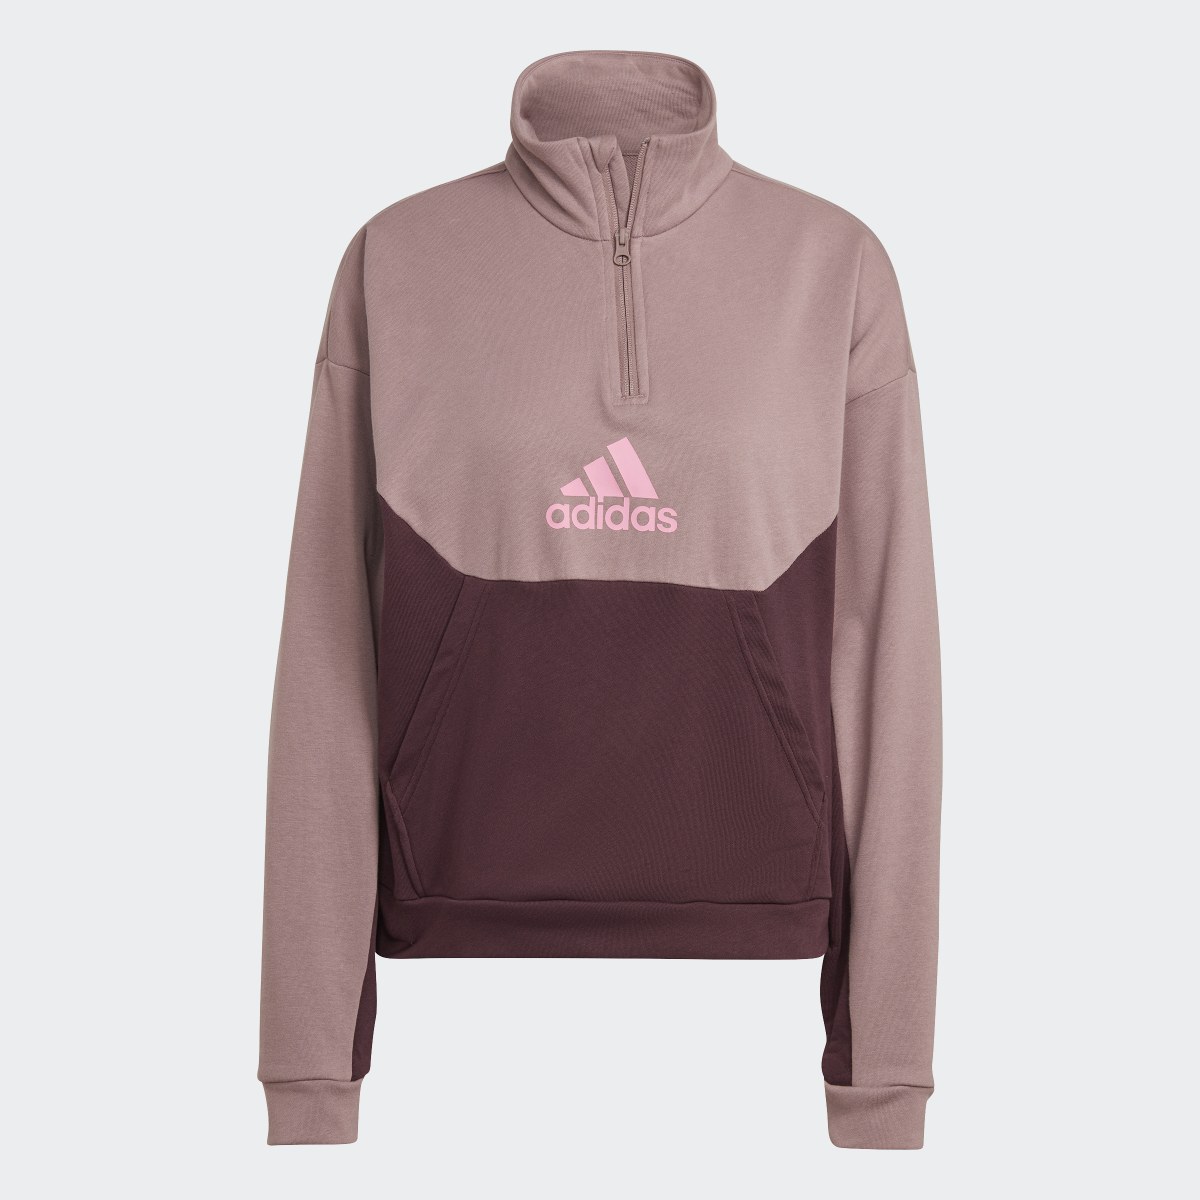 Adidas Half-Zip and Tights Tracksuit. 5